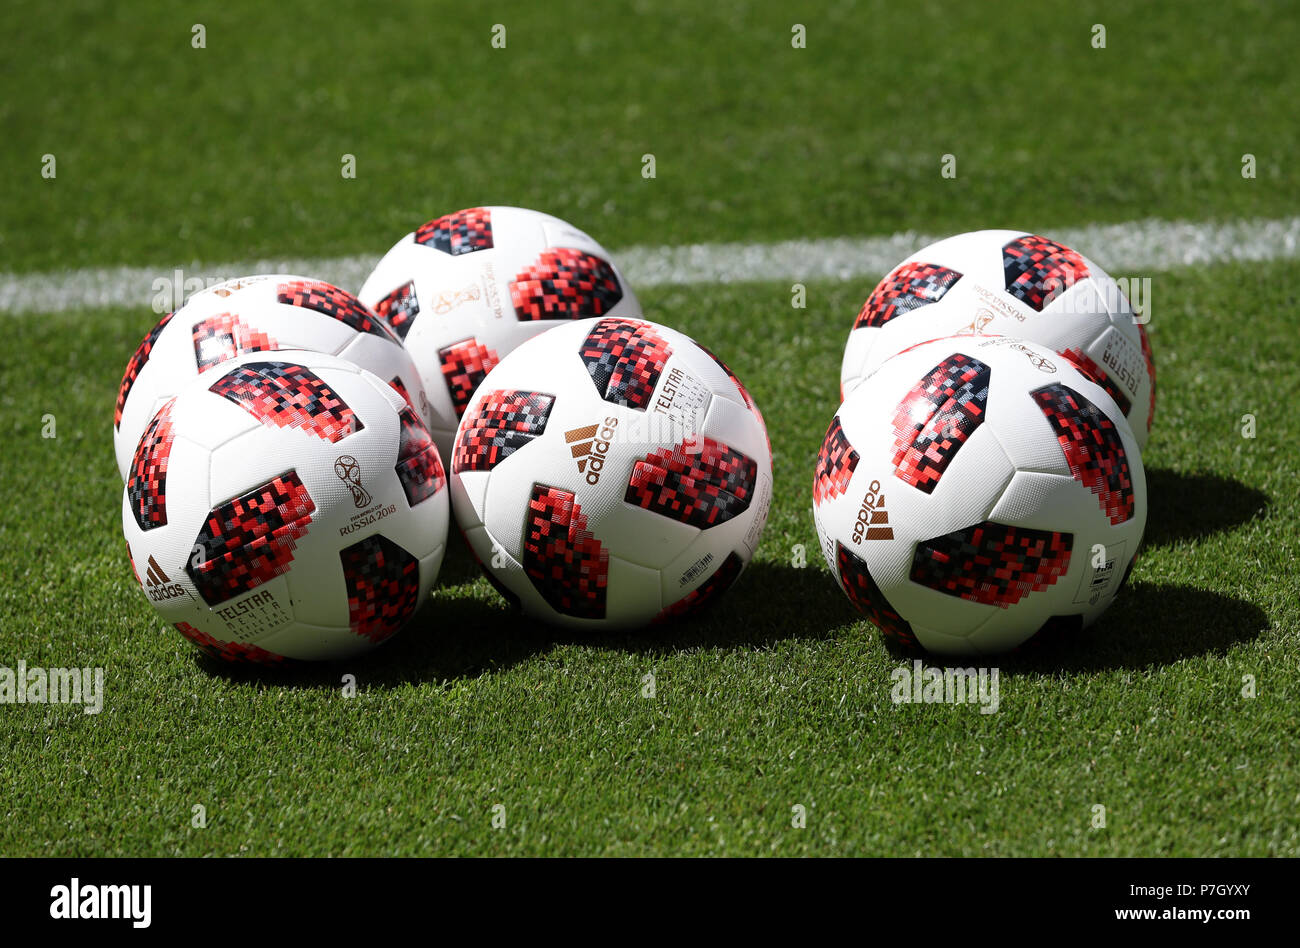 Adidas Telstar High Resolution Stock Photography And Images Alamy